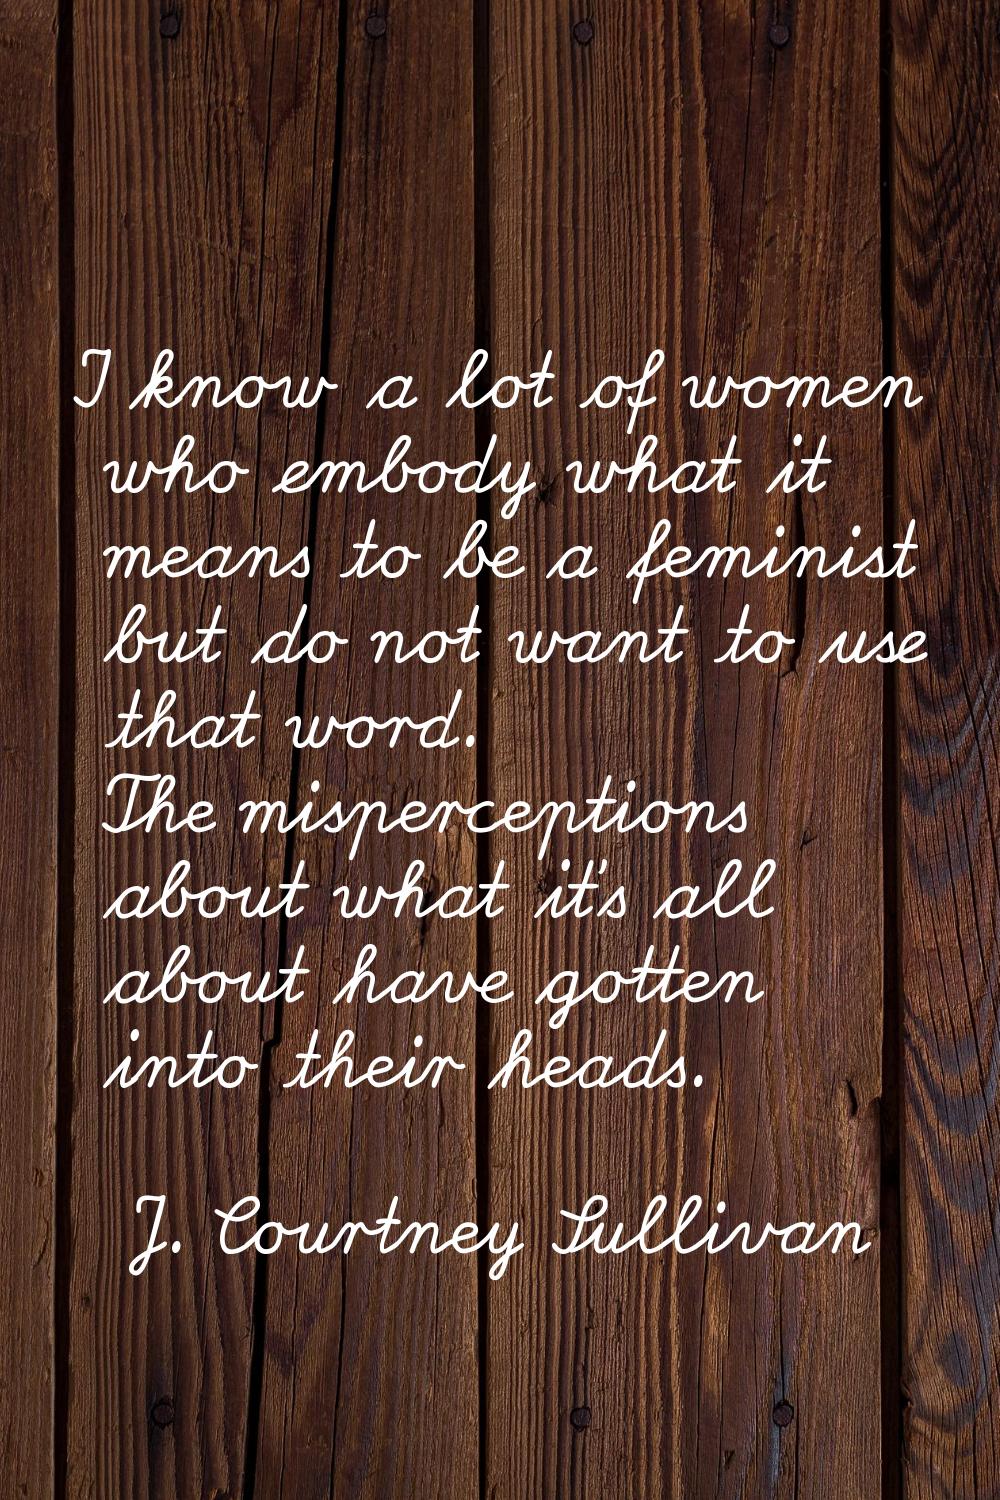 I know a lot of women who embody what it means to be a feminist but do not want to use that word. T